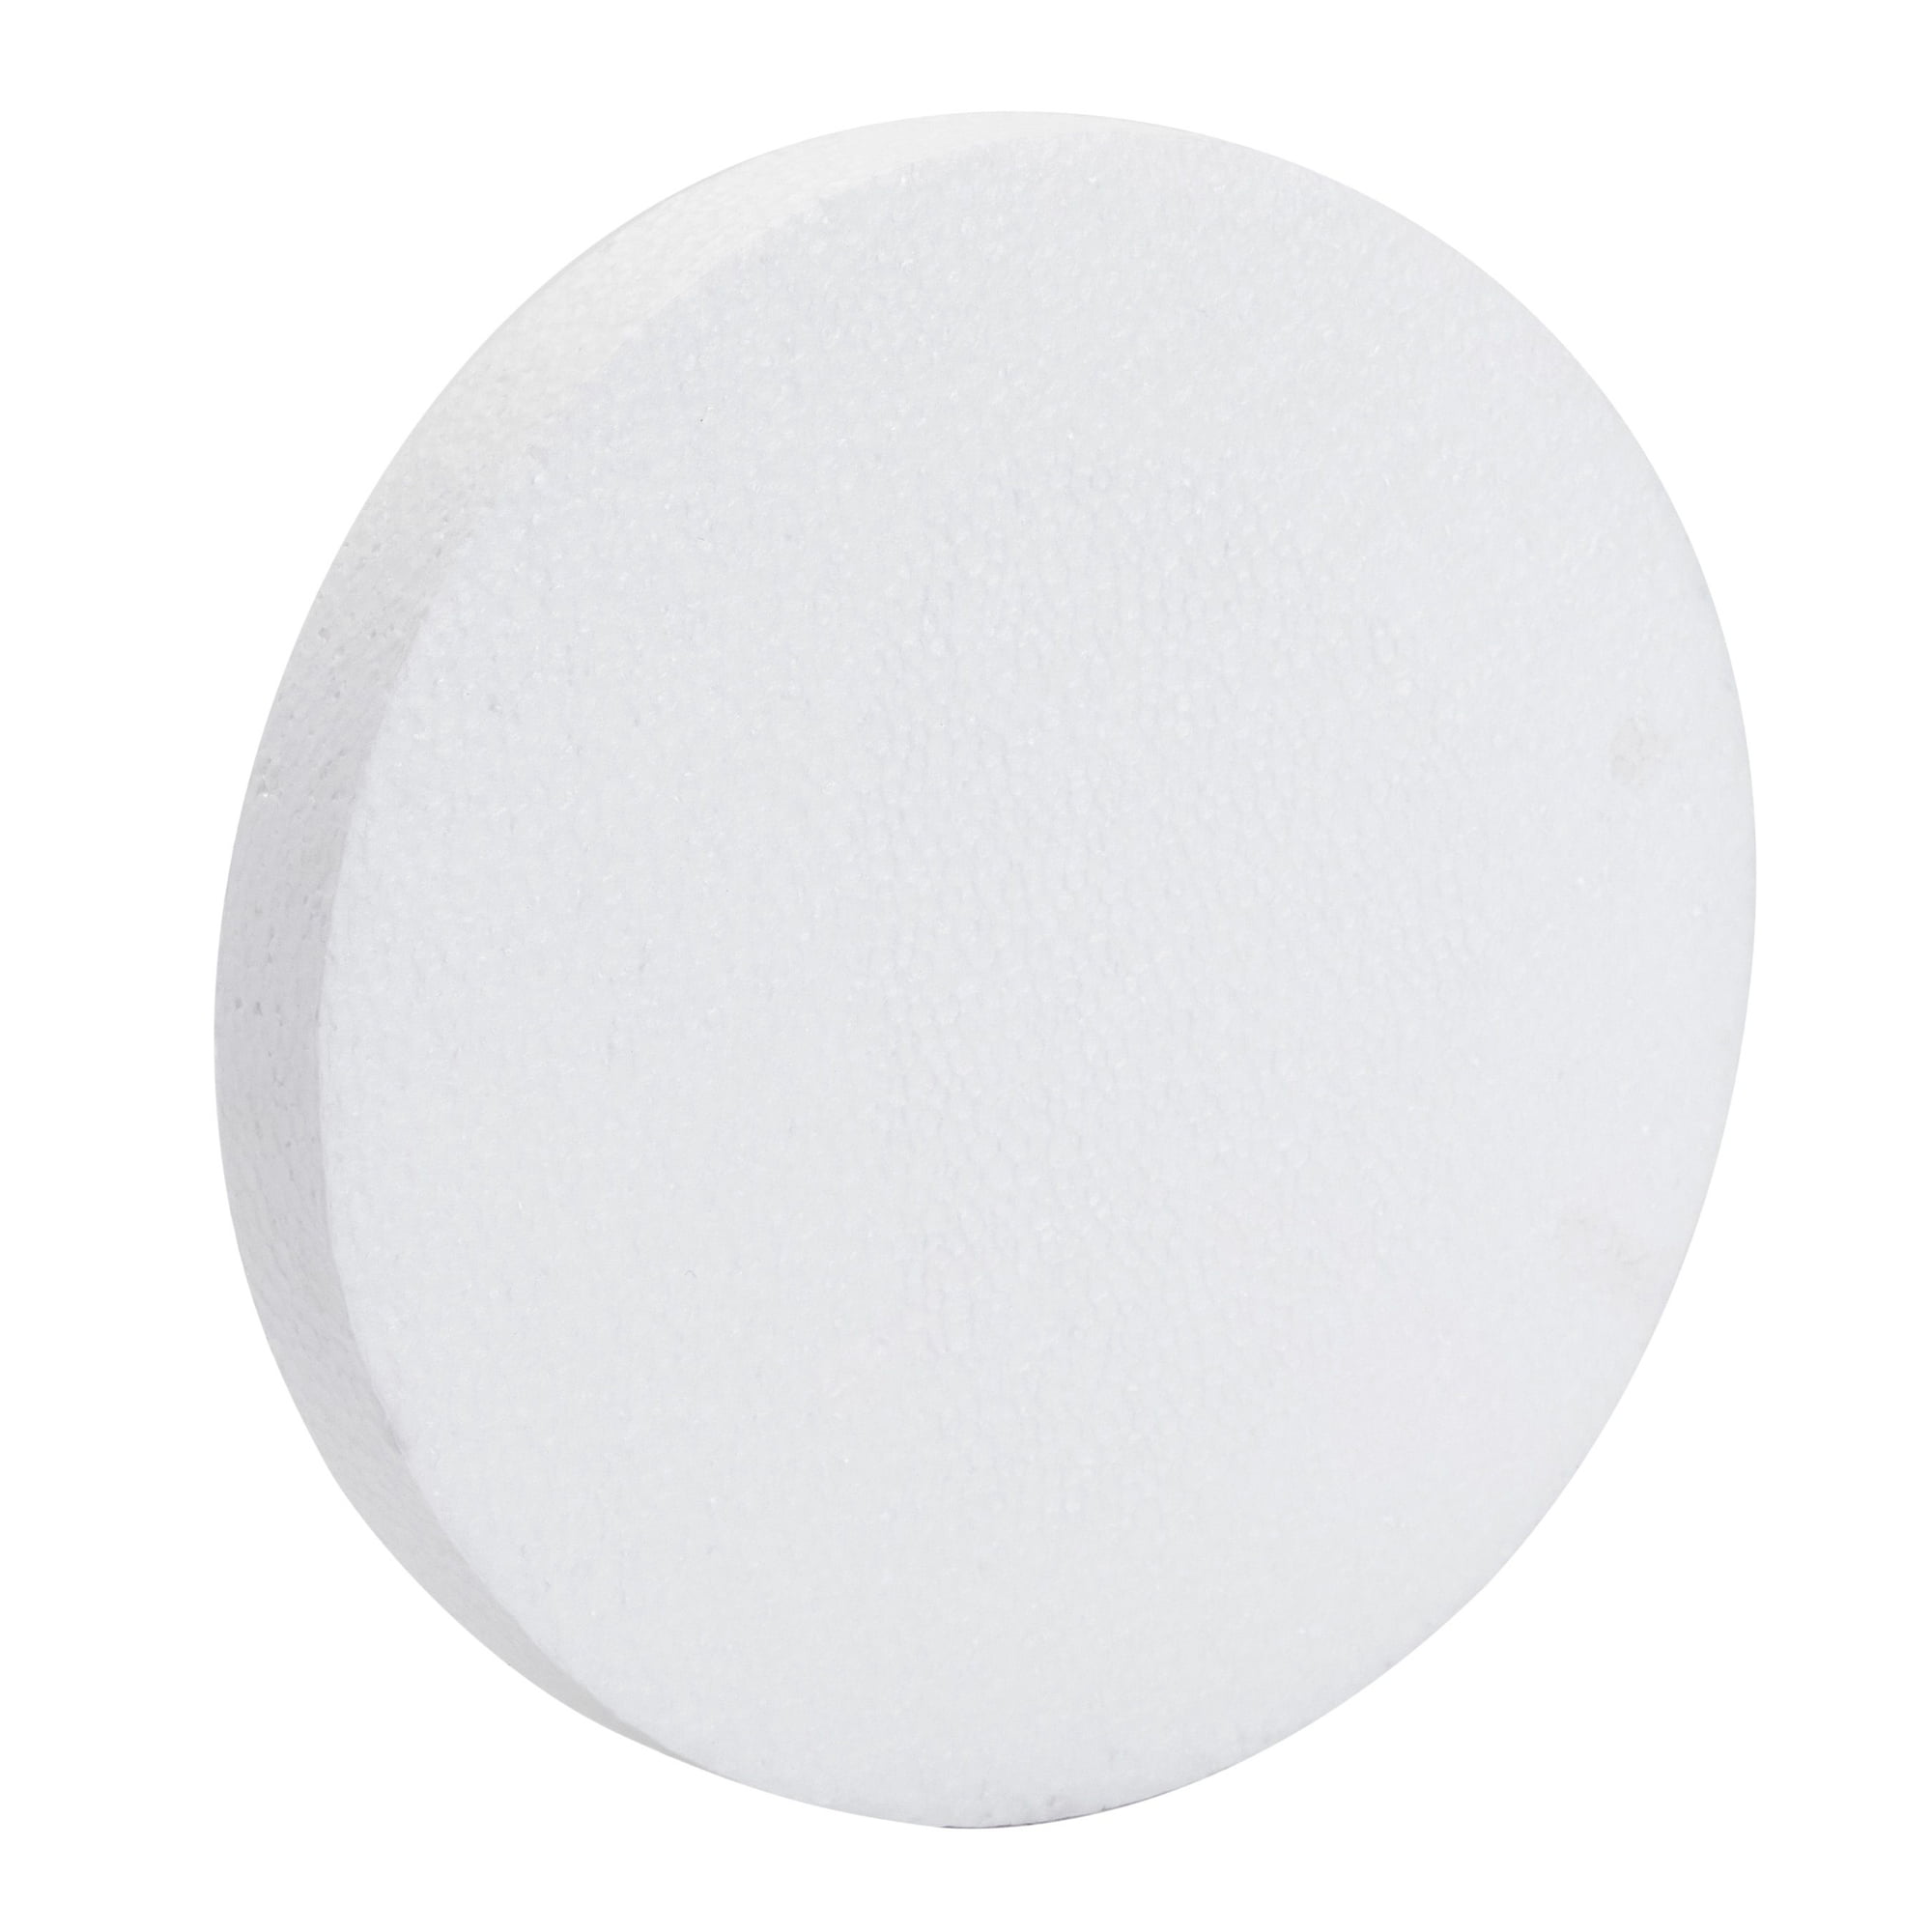 8 Inch Foam Circles for Crafts, 1 Inch Thick Round Polystyrene Discs